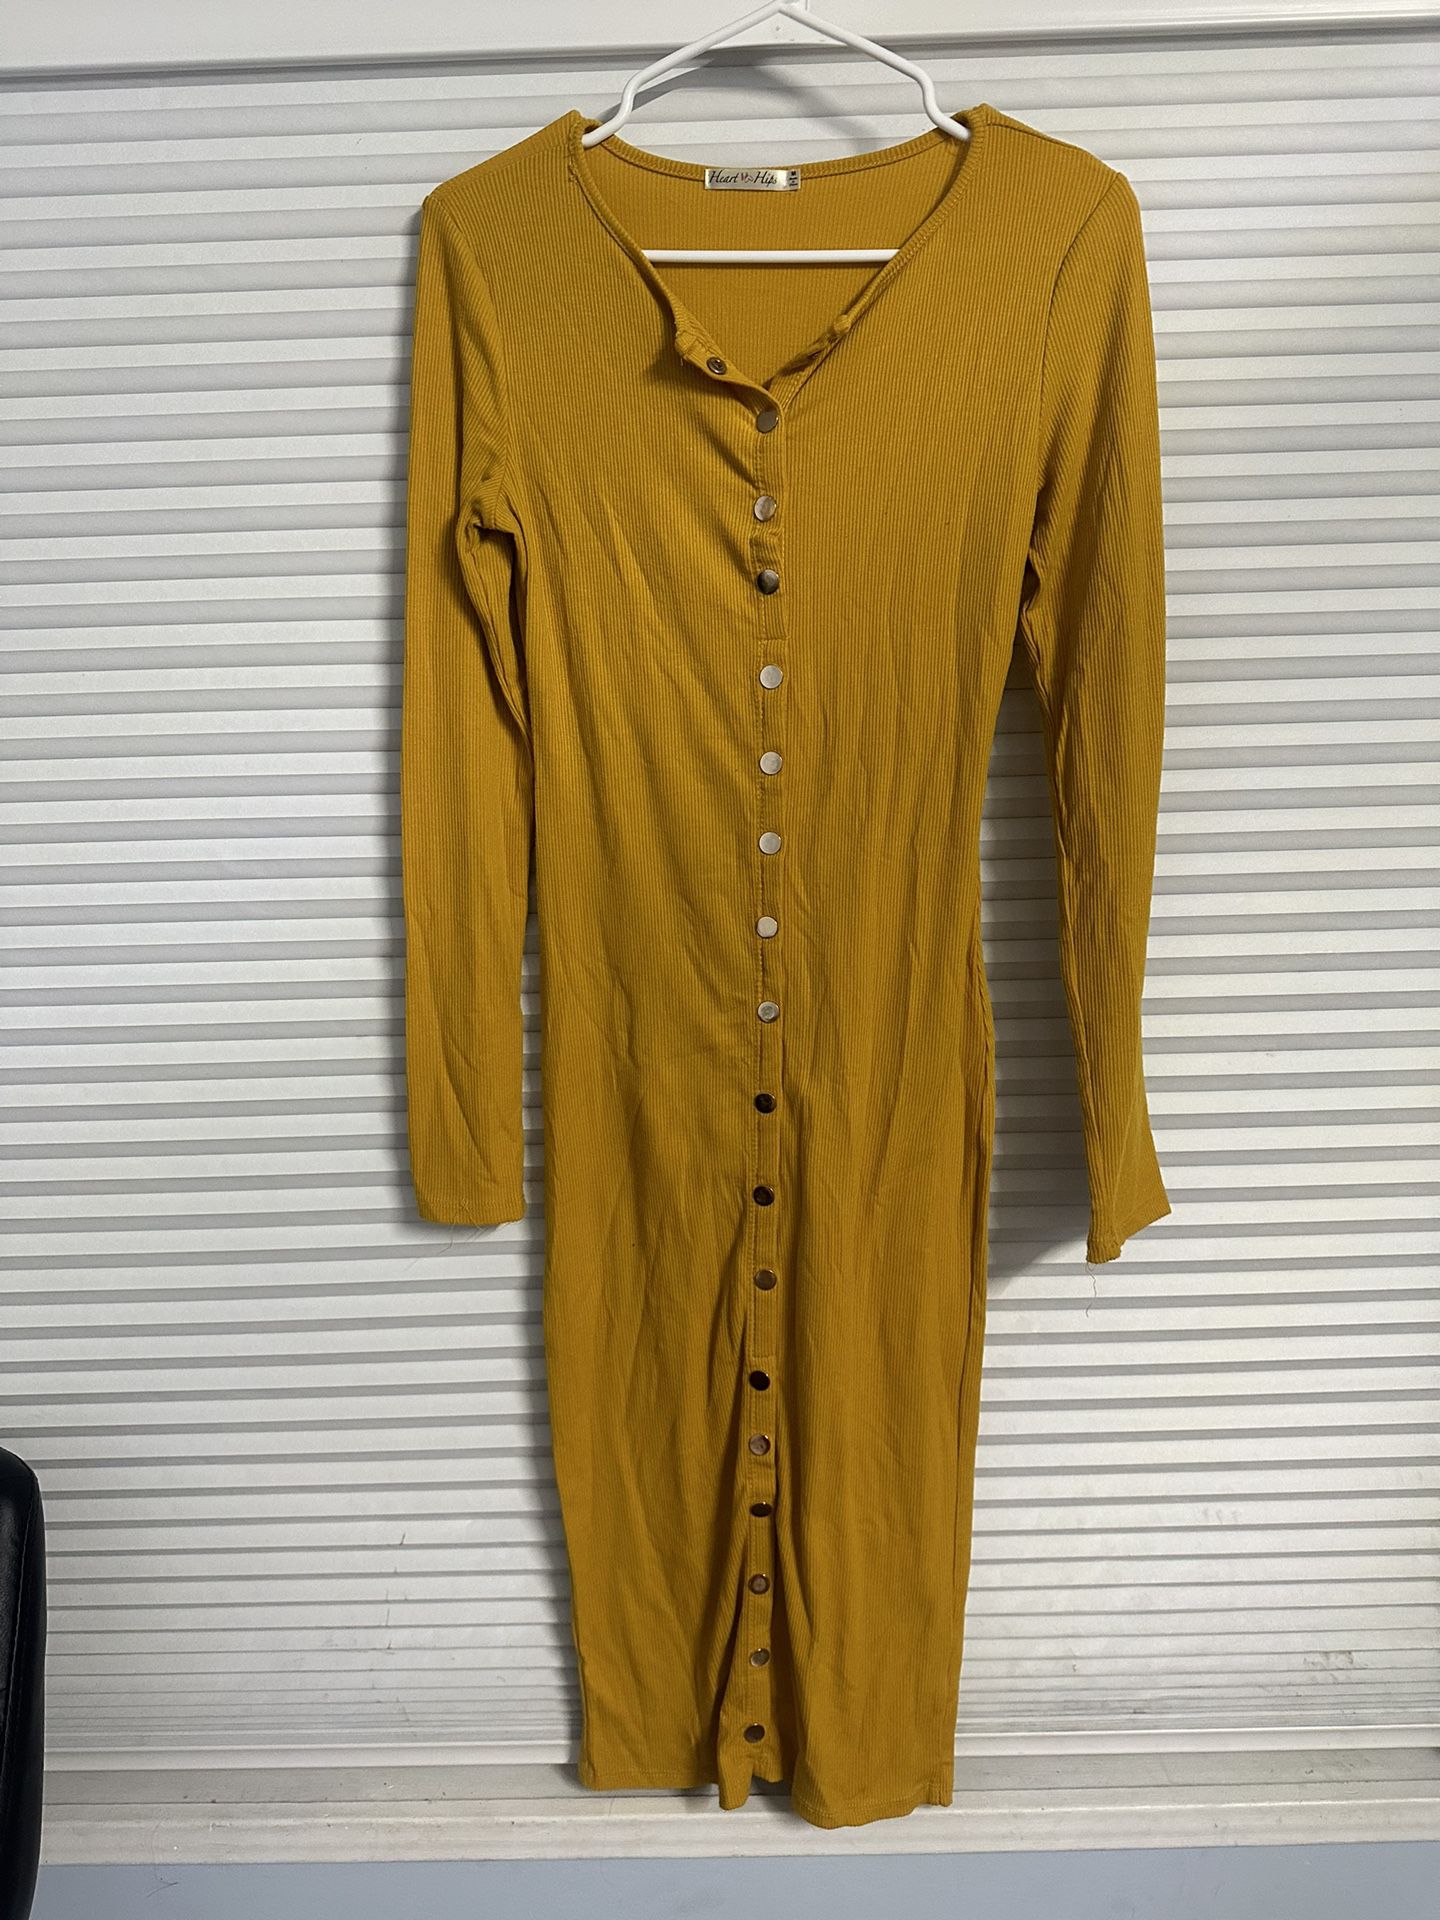 brand new mustard yellow dress size M, 100% cotton pick up near Monterey and Tully Rd SJ Ca 95112